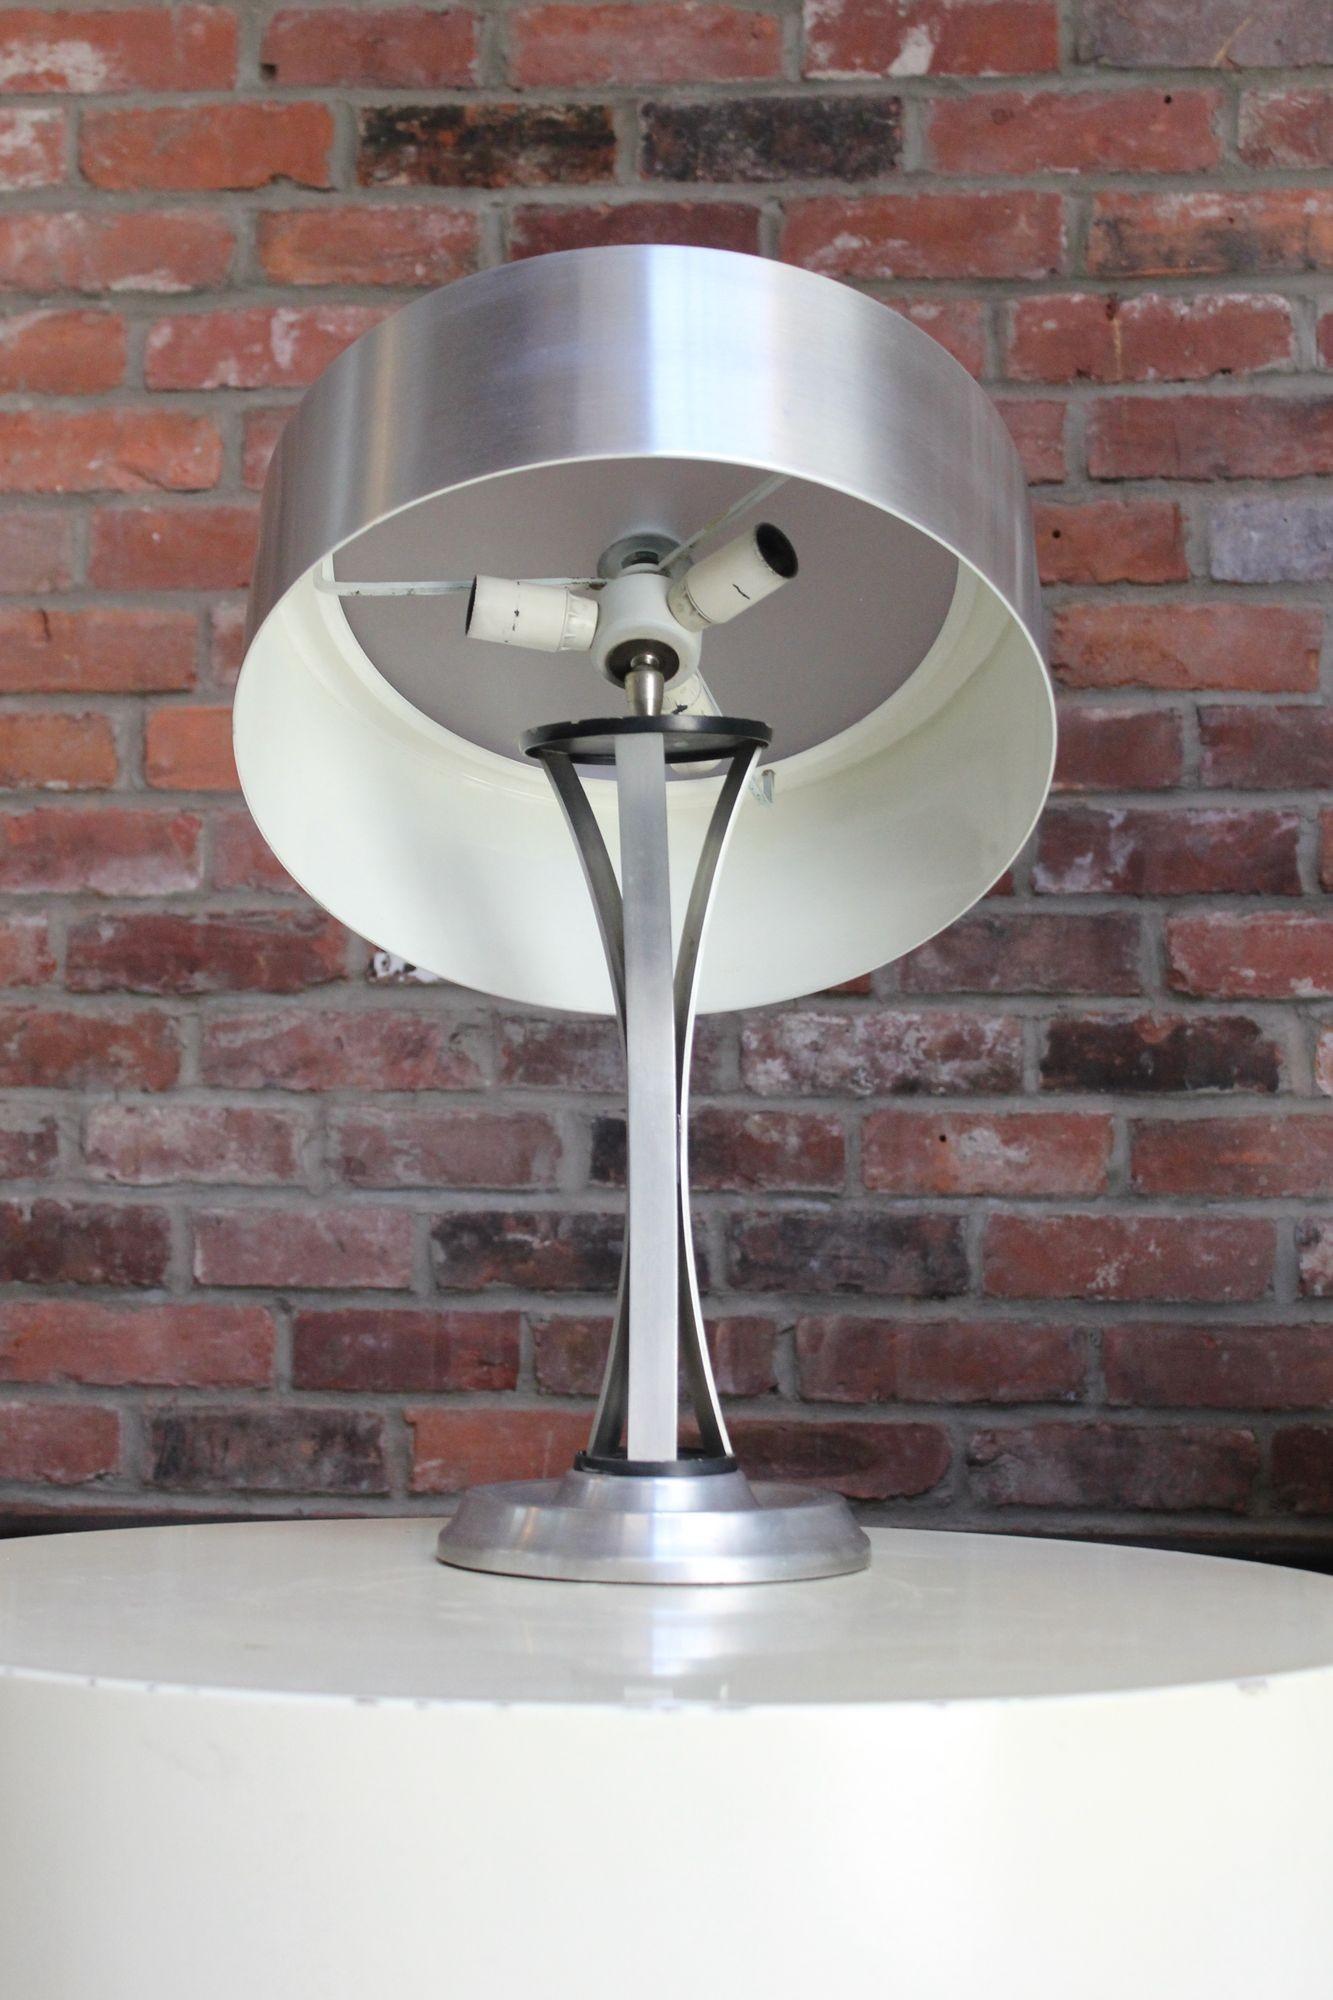 Polished aluminum table lamp with inset frosted glass shade by Oscar Torlasco for Lumi (Italy, ca. 1960s).
Ingenious design, marrying form and function designed with a useful adjustability function without compromising style. Specifically, there is